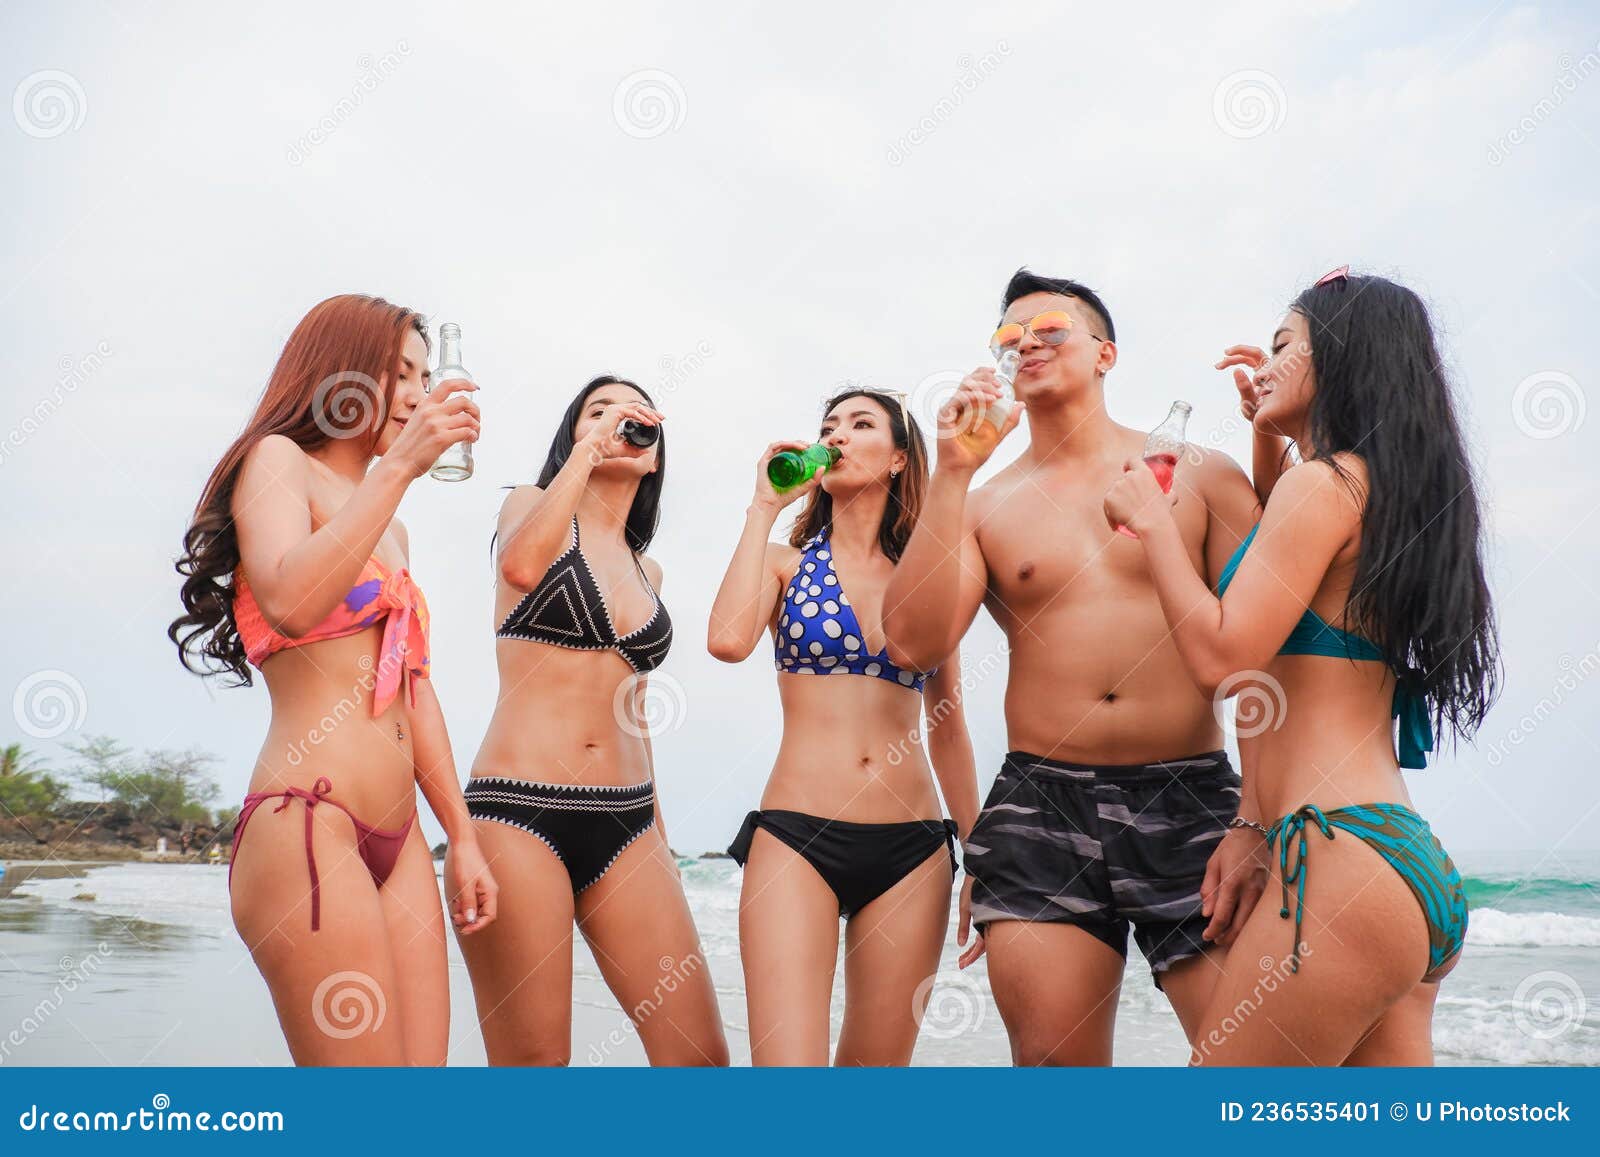 Bikini Party Seaside Enjoy Meeting Group Friends Having Fun Dancing and  Drinking Beverage on the Beach, Happy Life on Summer Stock Image - Image of  celebration, beach: 236535401